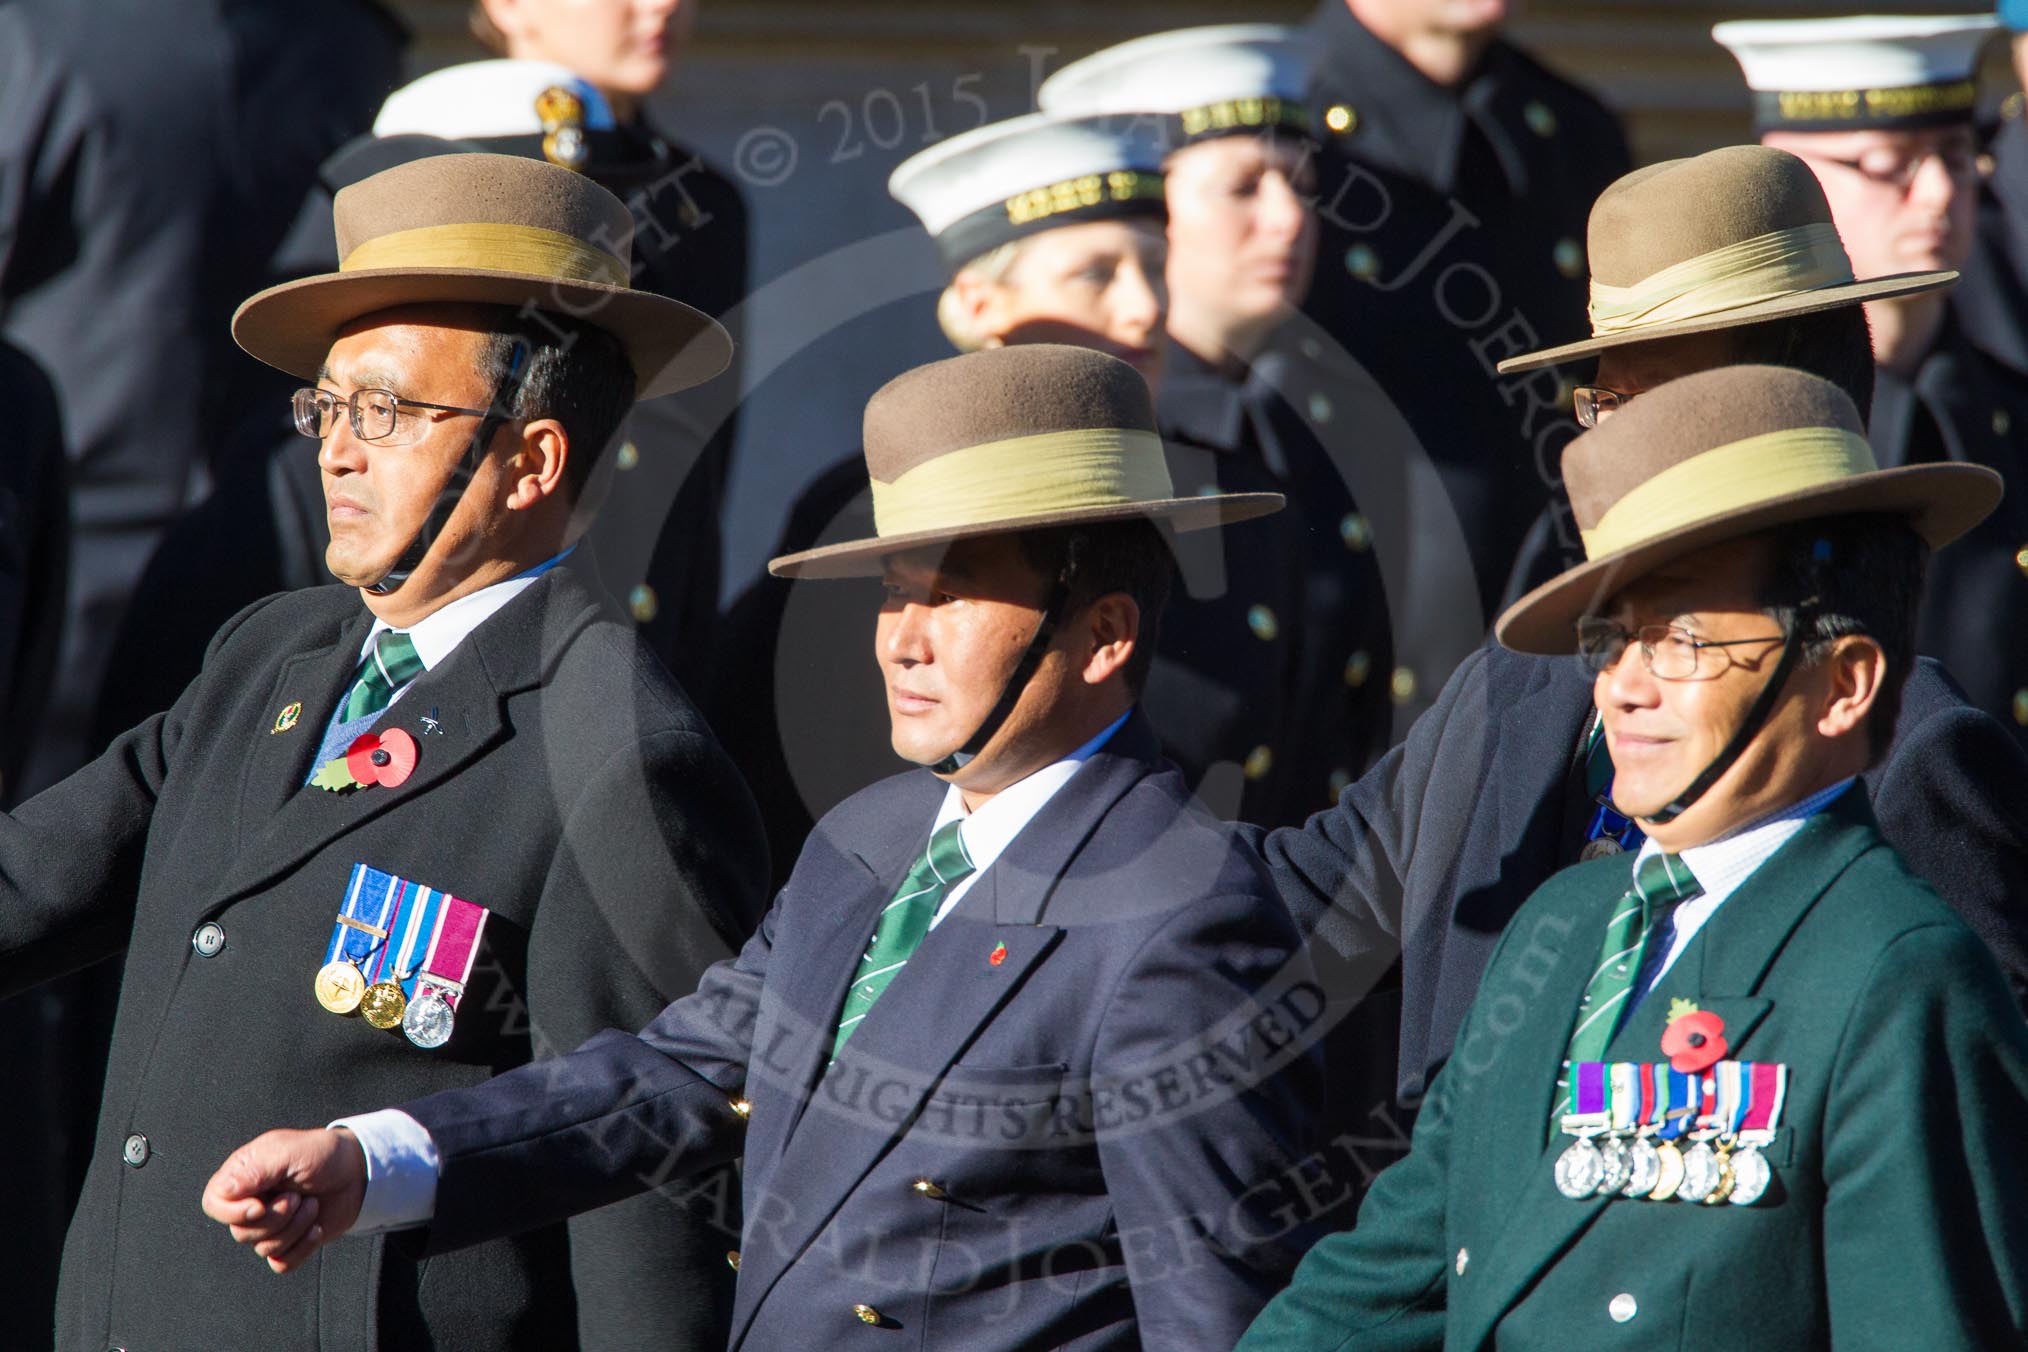 Remembrance Sunday Cenotaph March Past 2013: D2 - British Gurkha Welfare Association..
Press stand opposite the Foreign Office building, Whitehall, London SW1,
London,
Greater London,
United Kingdom,
on 10 November 2013 at 11:38, image #32